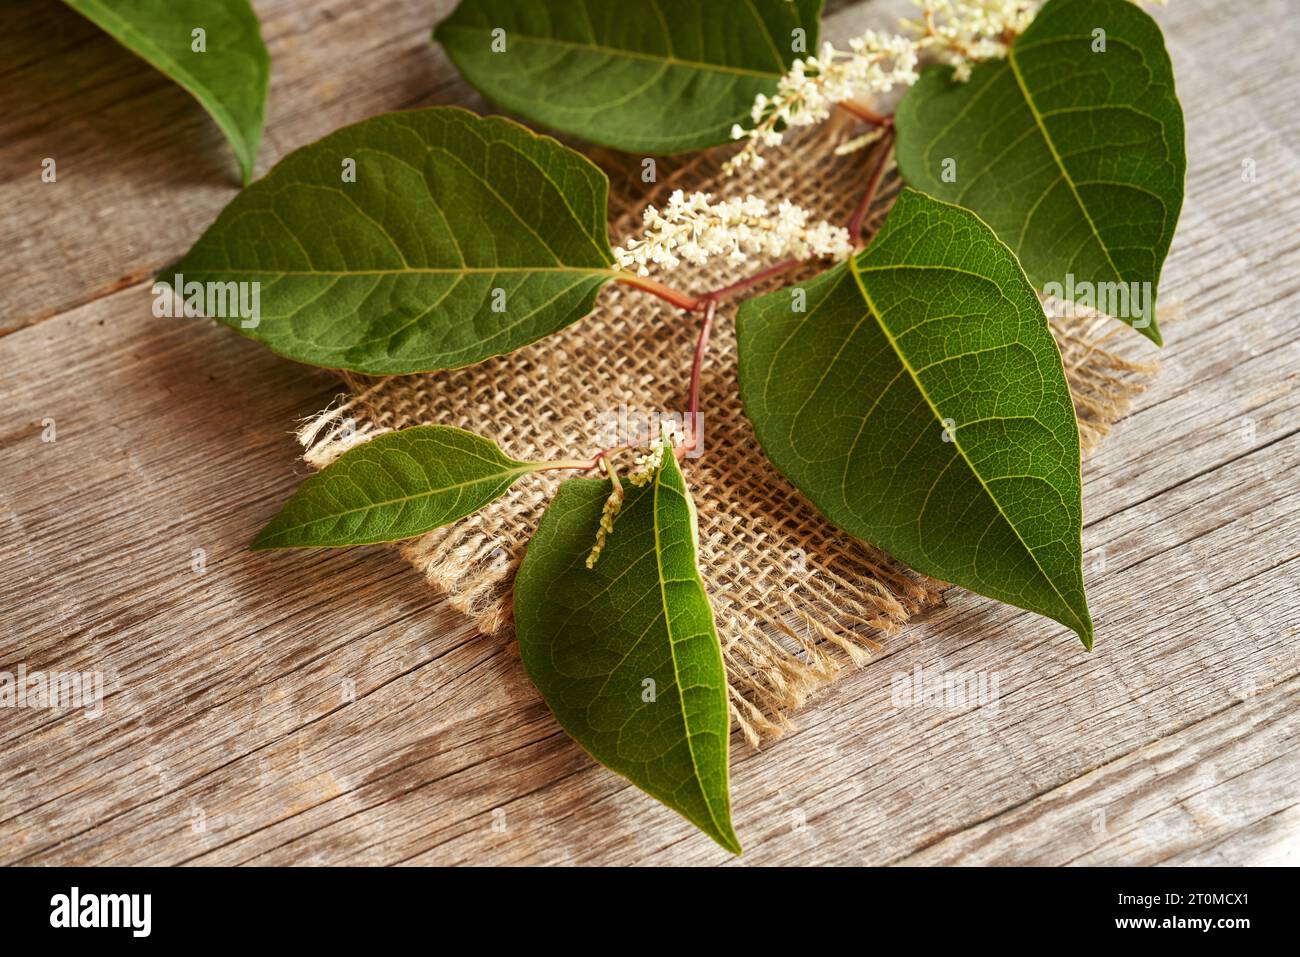 Japanese knotweed or Reynoutria japonica plant on a table Stock Photo